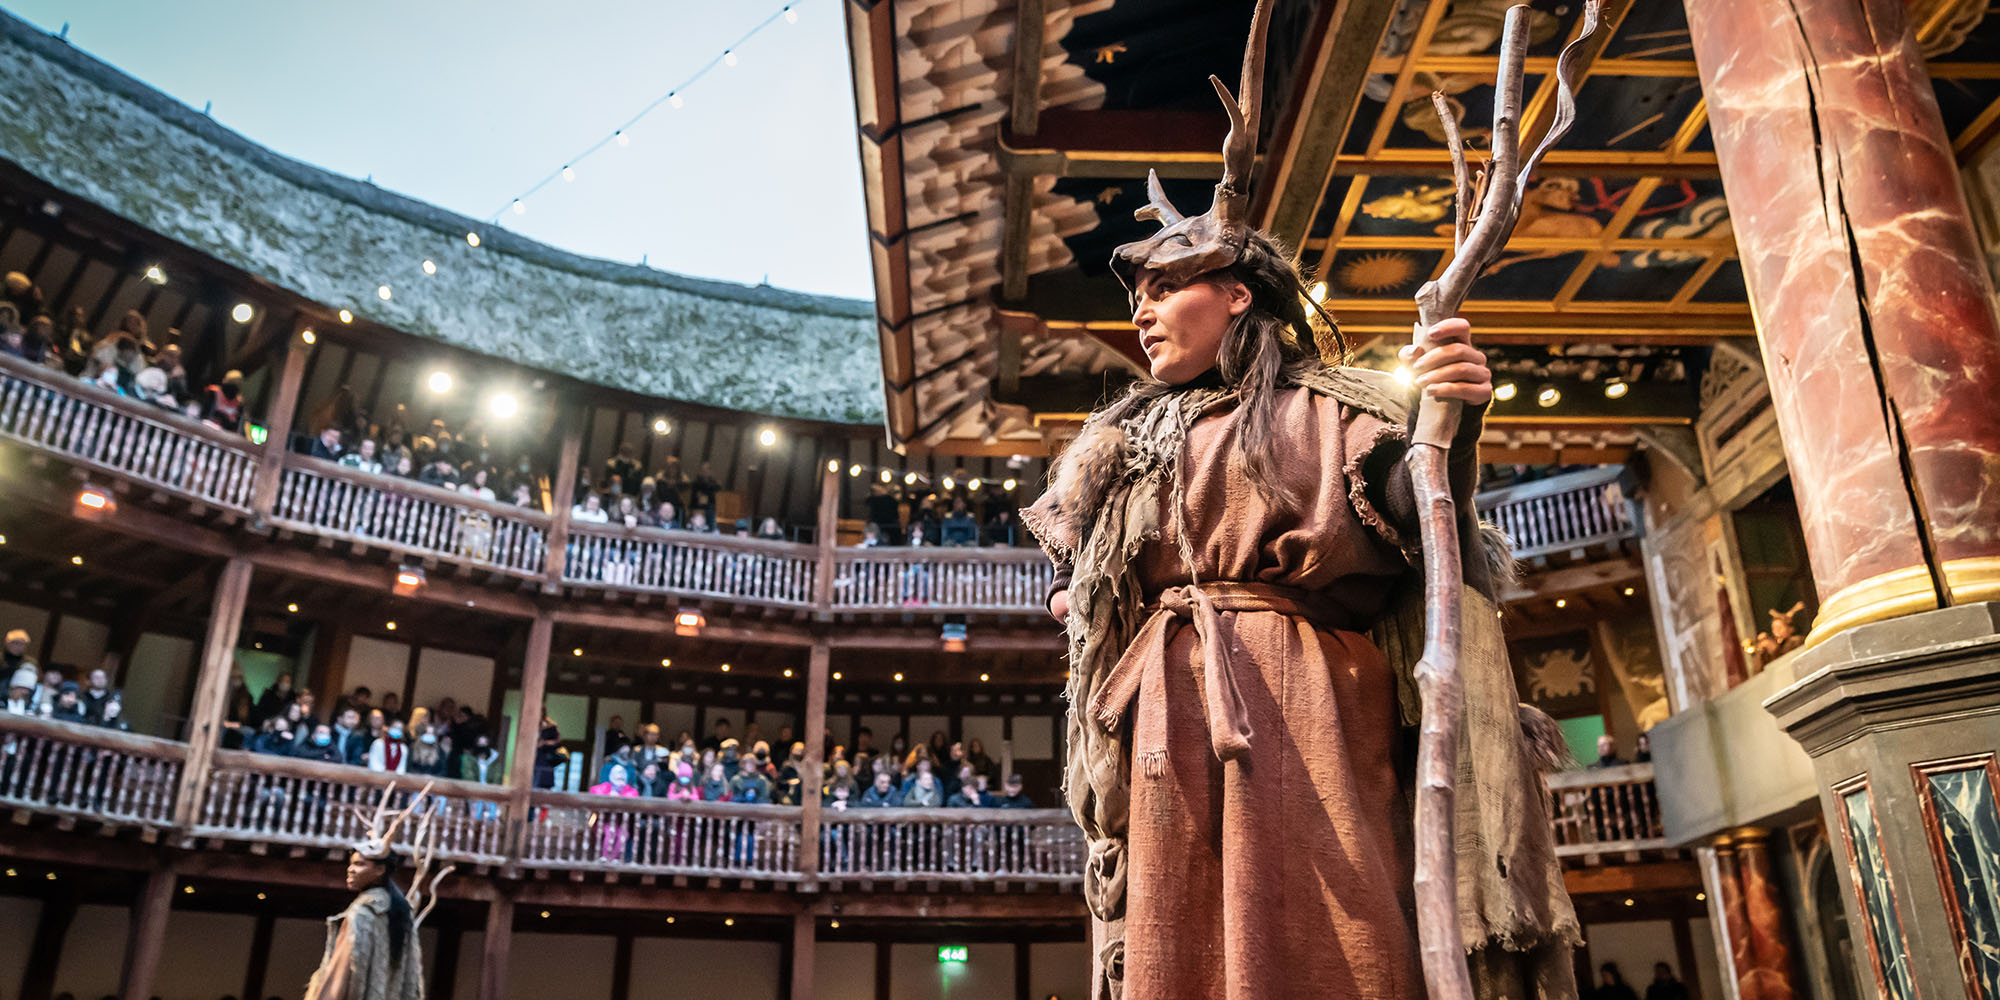 An actor wearing brown rags and a fur cloak, with an animal antler headpiece, holds a wooden staff on the Globe Theatre stage, looking up at the audience sat in the circular Galleries around them.